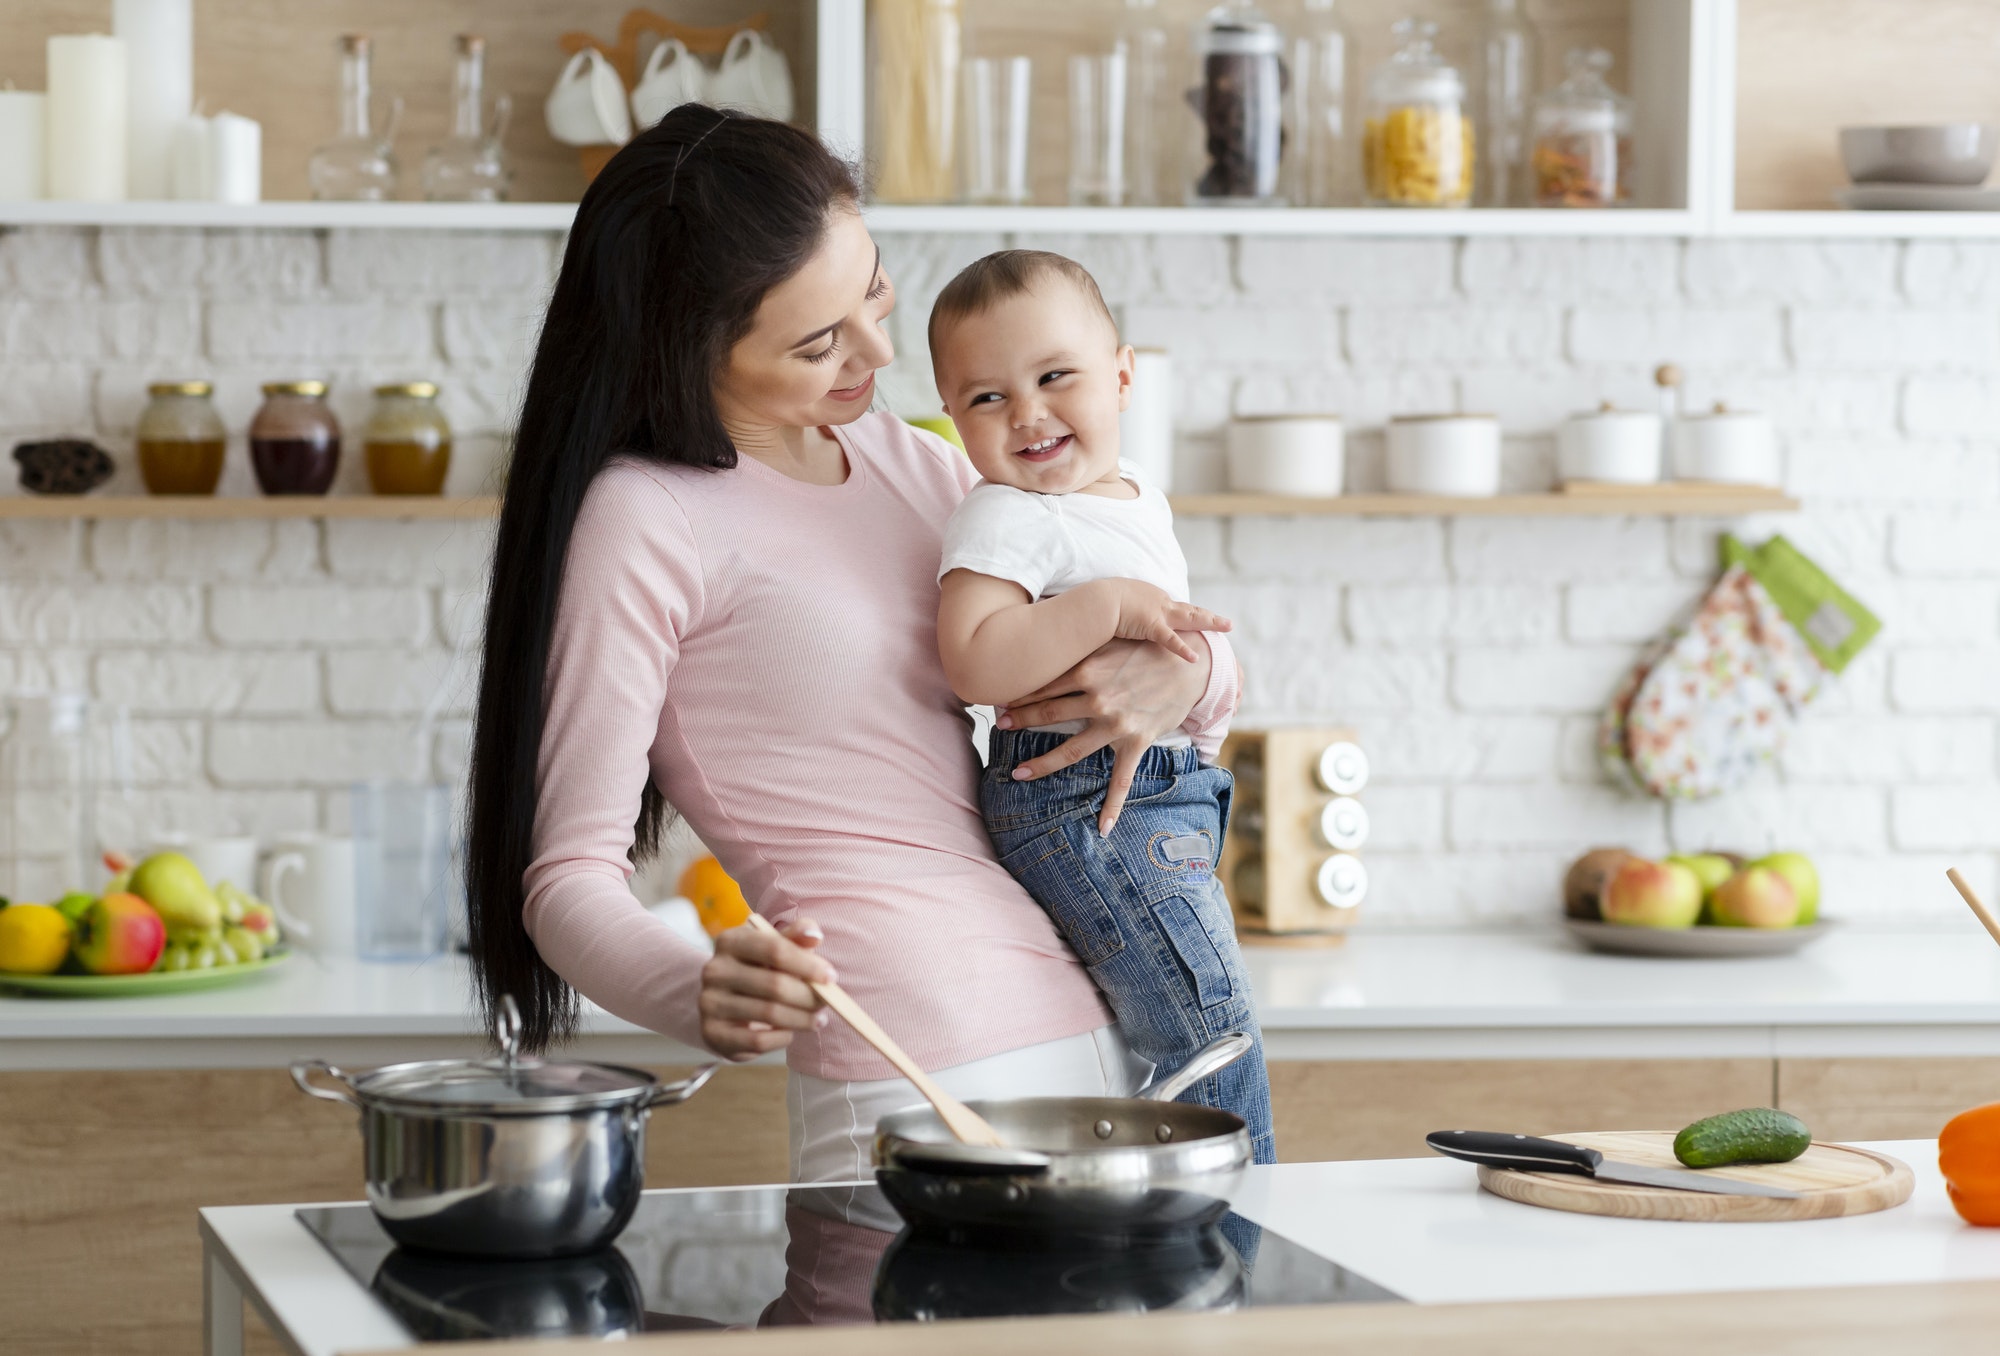 Millennial woman laughing with baby son, preparing food at kitchen